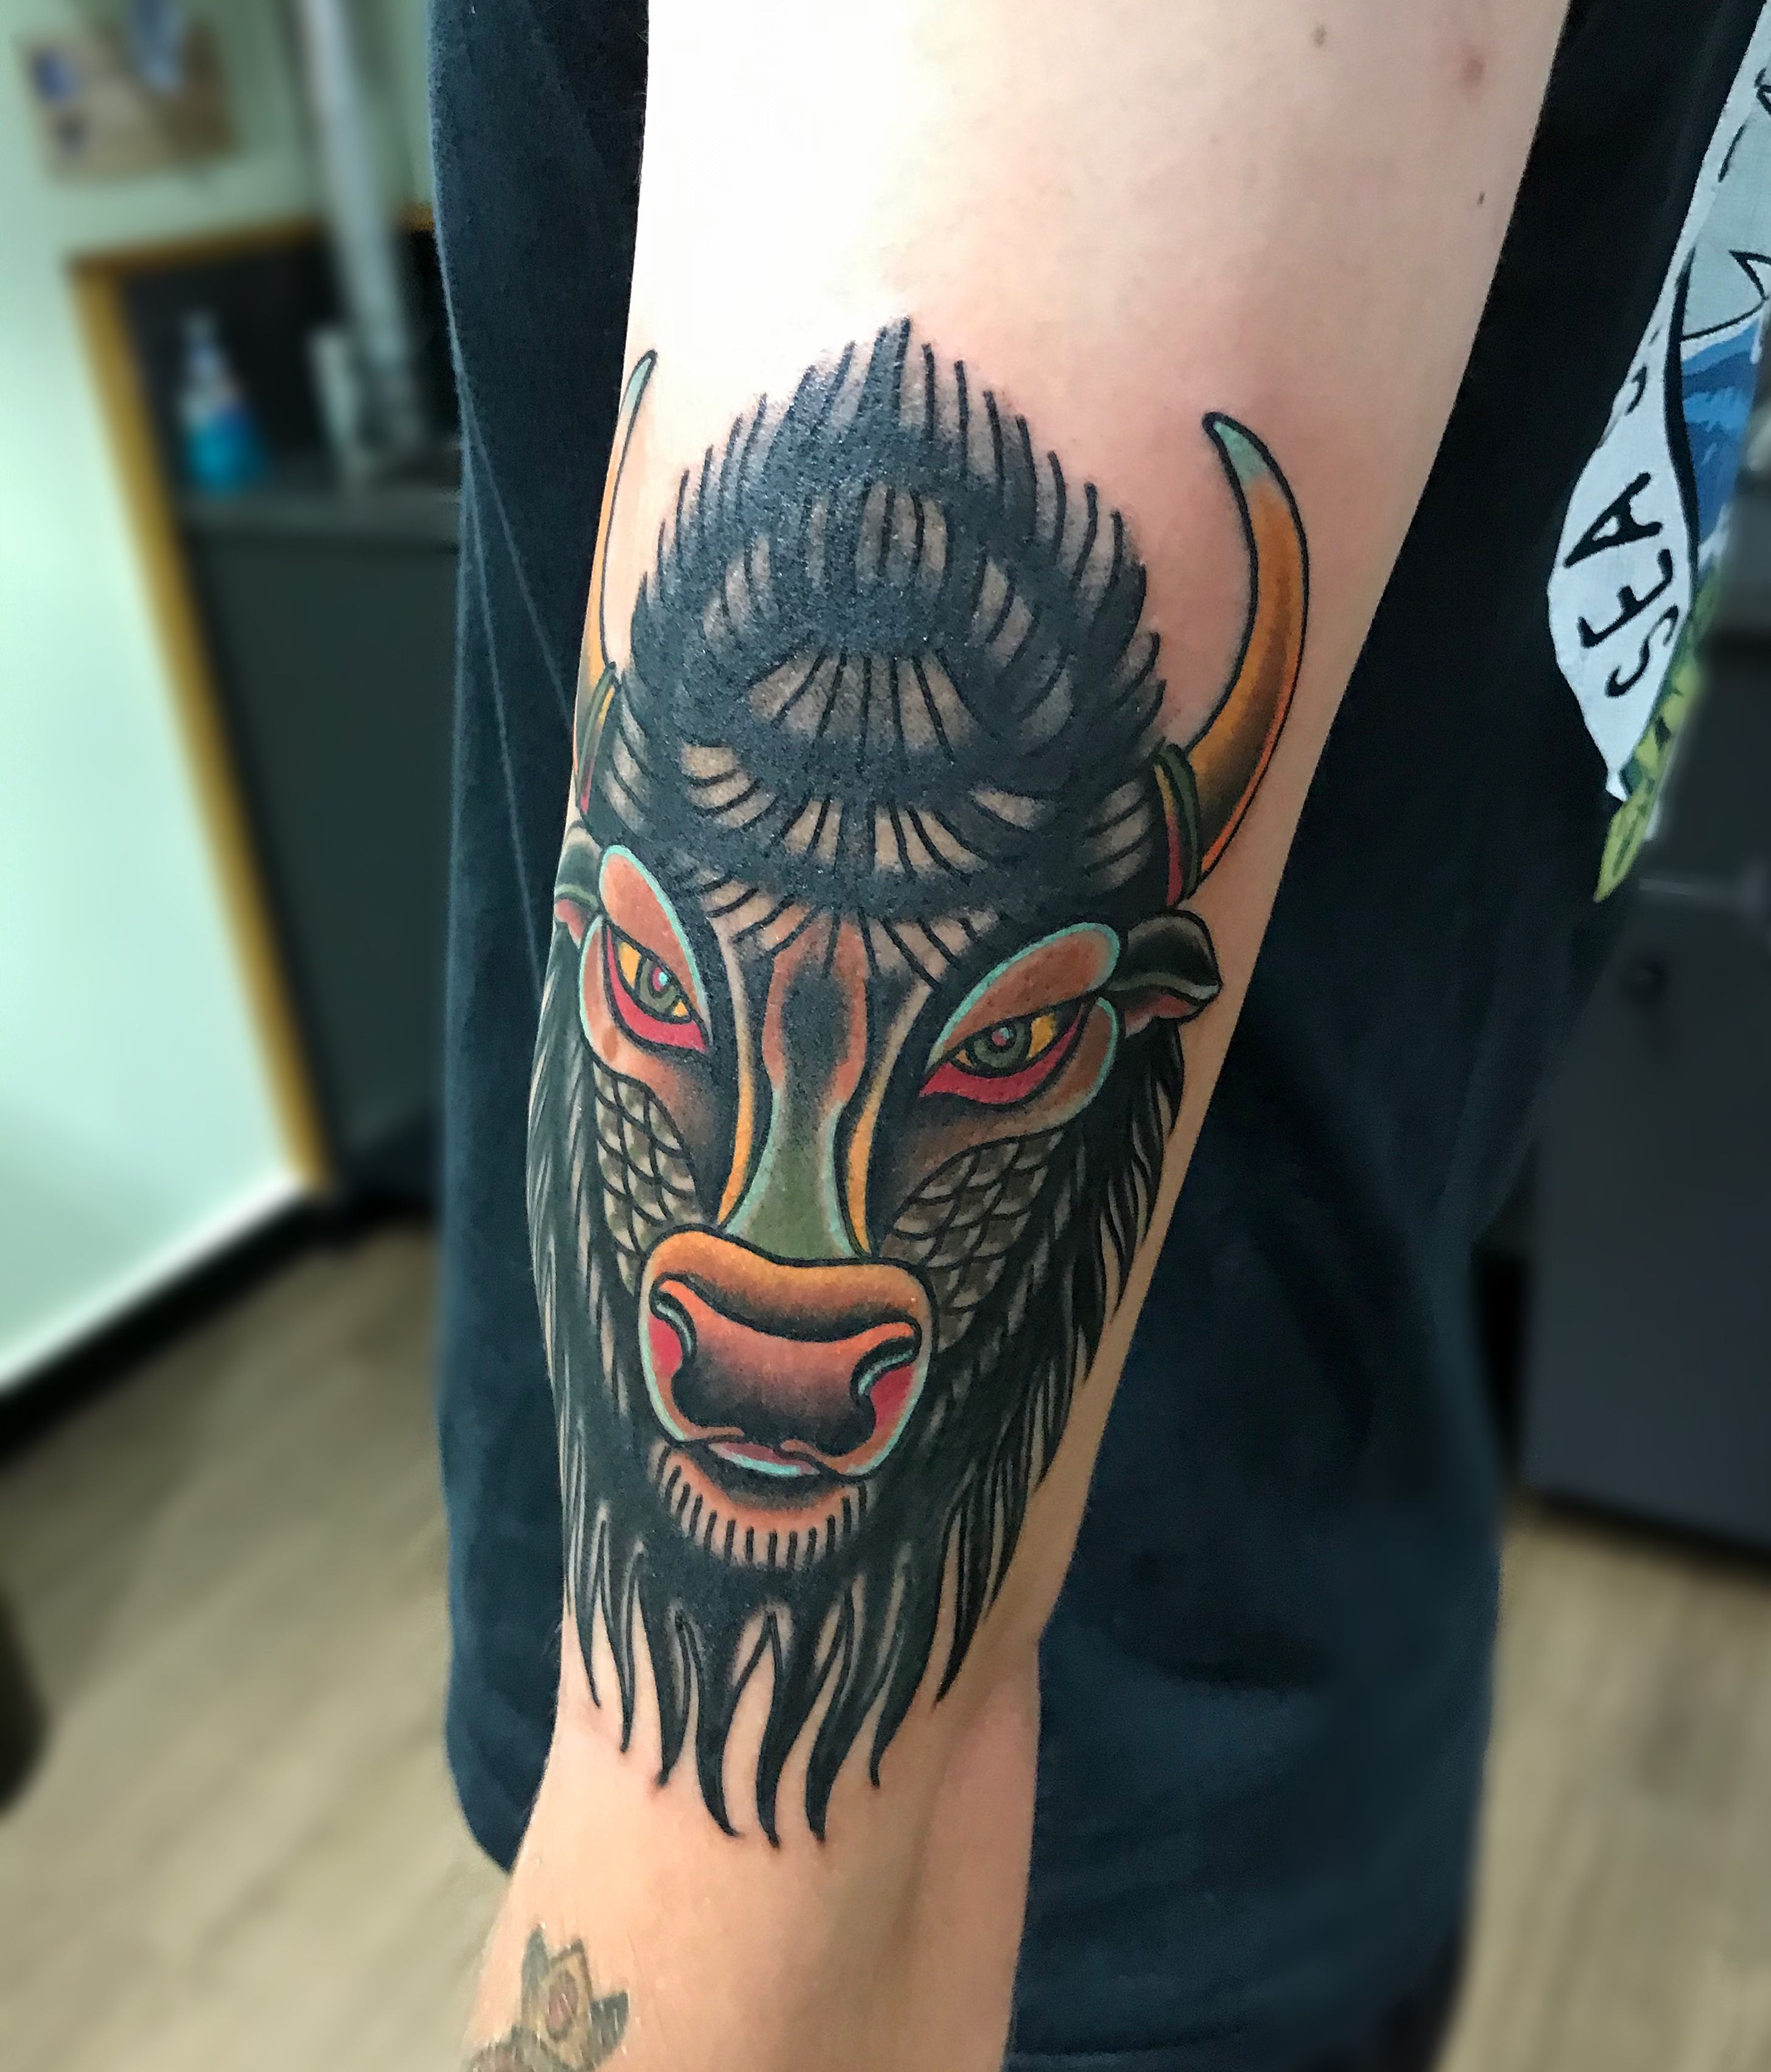 Changed Forever Tattoos   Traditional Bison   Only R700 for any  Traditional Tattoos under 10cm   Facebook